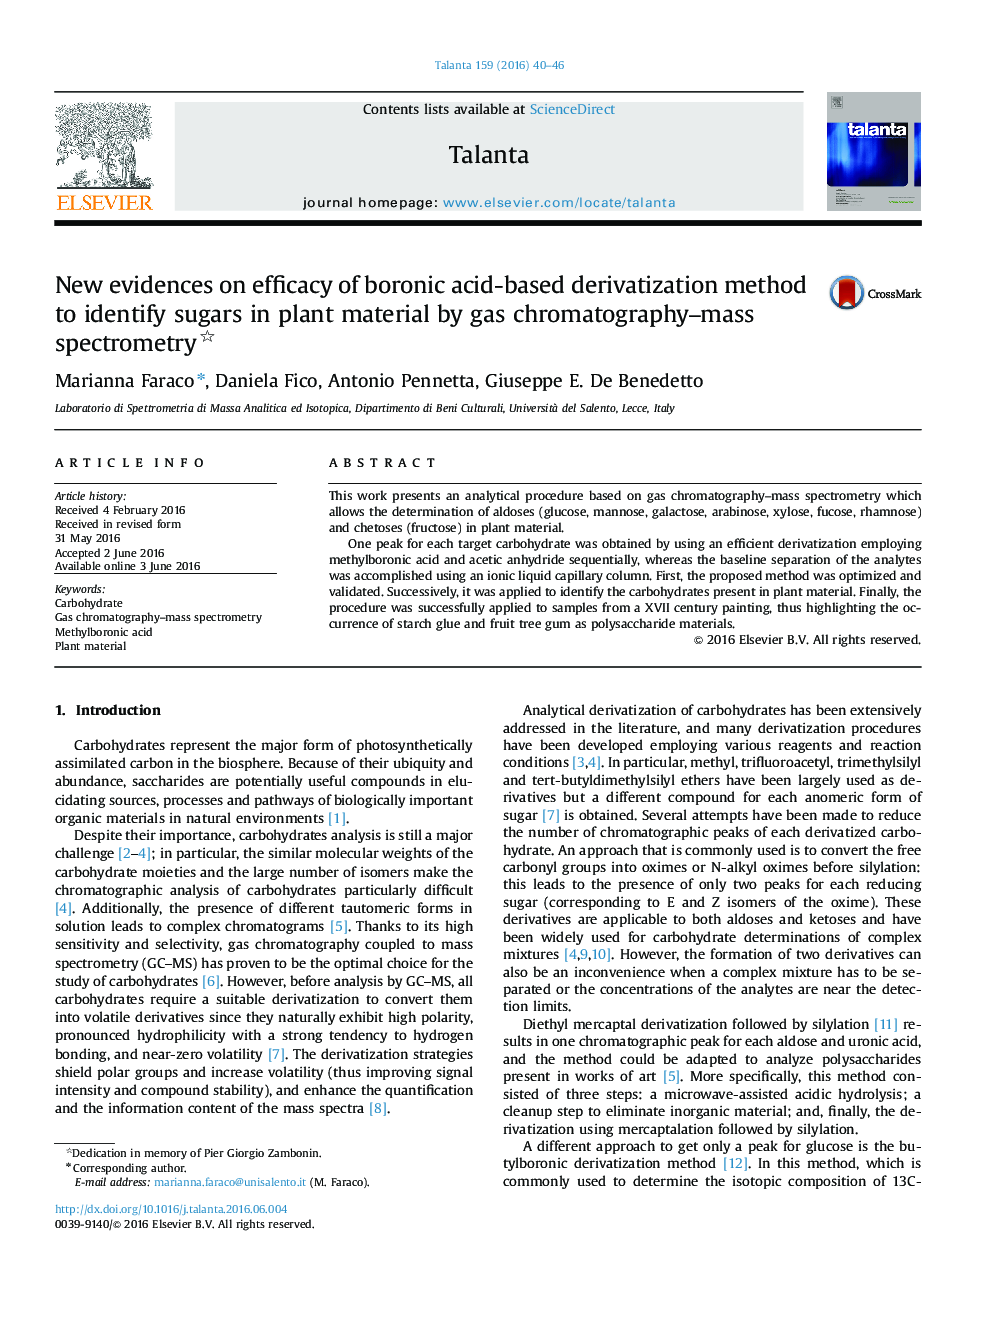 New evidences on efficacy of boronic acid-based derivatization method to identify sugars in plant material by gas chromatography–mass spectrometry 